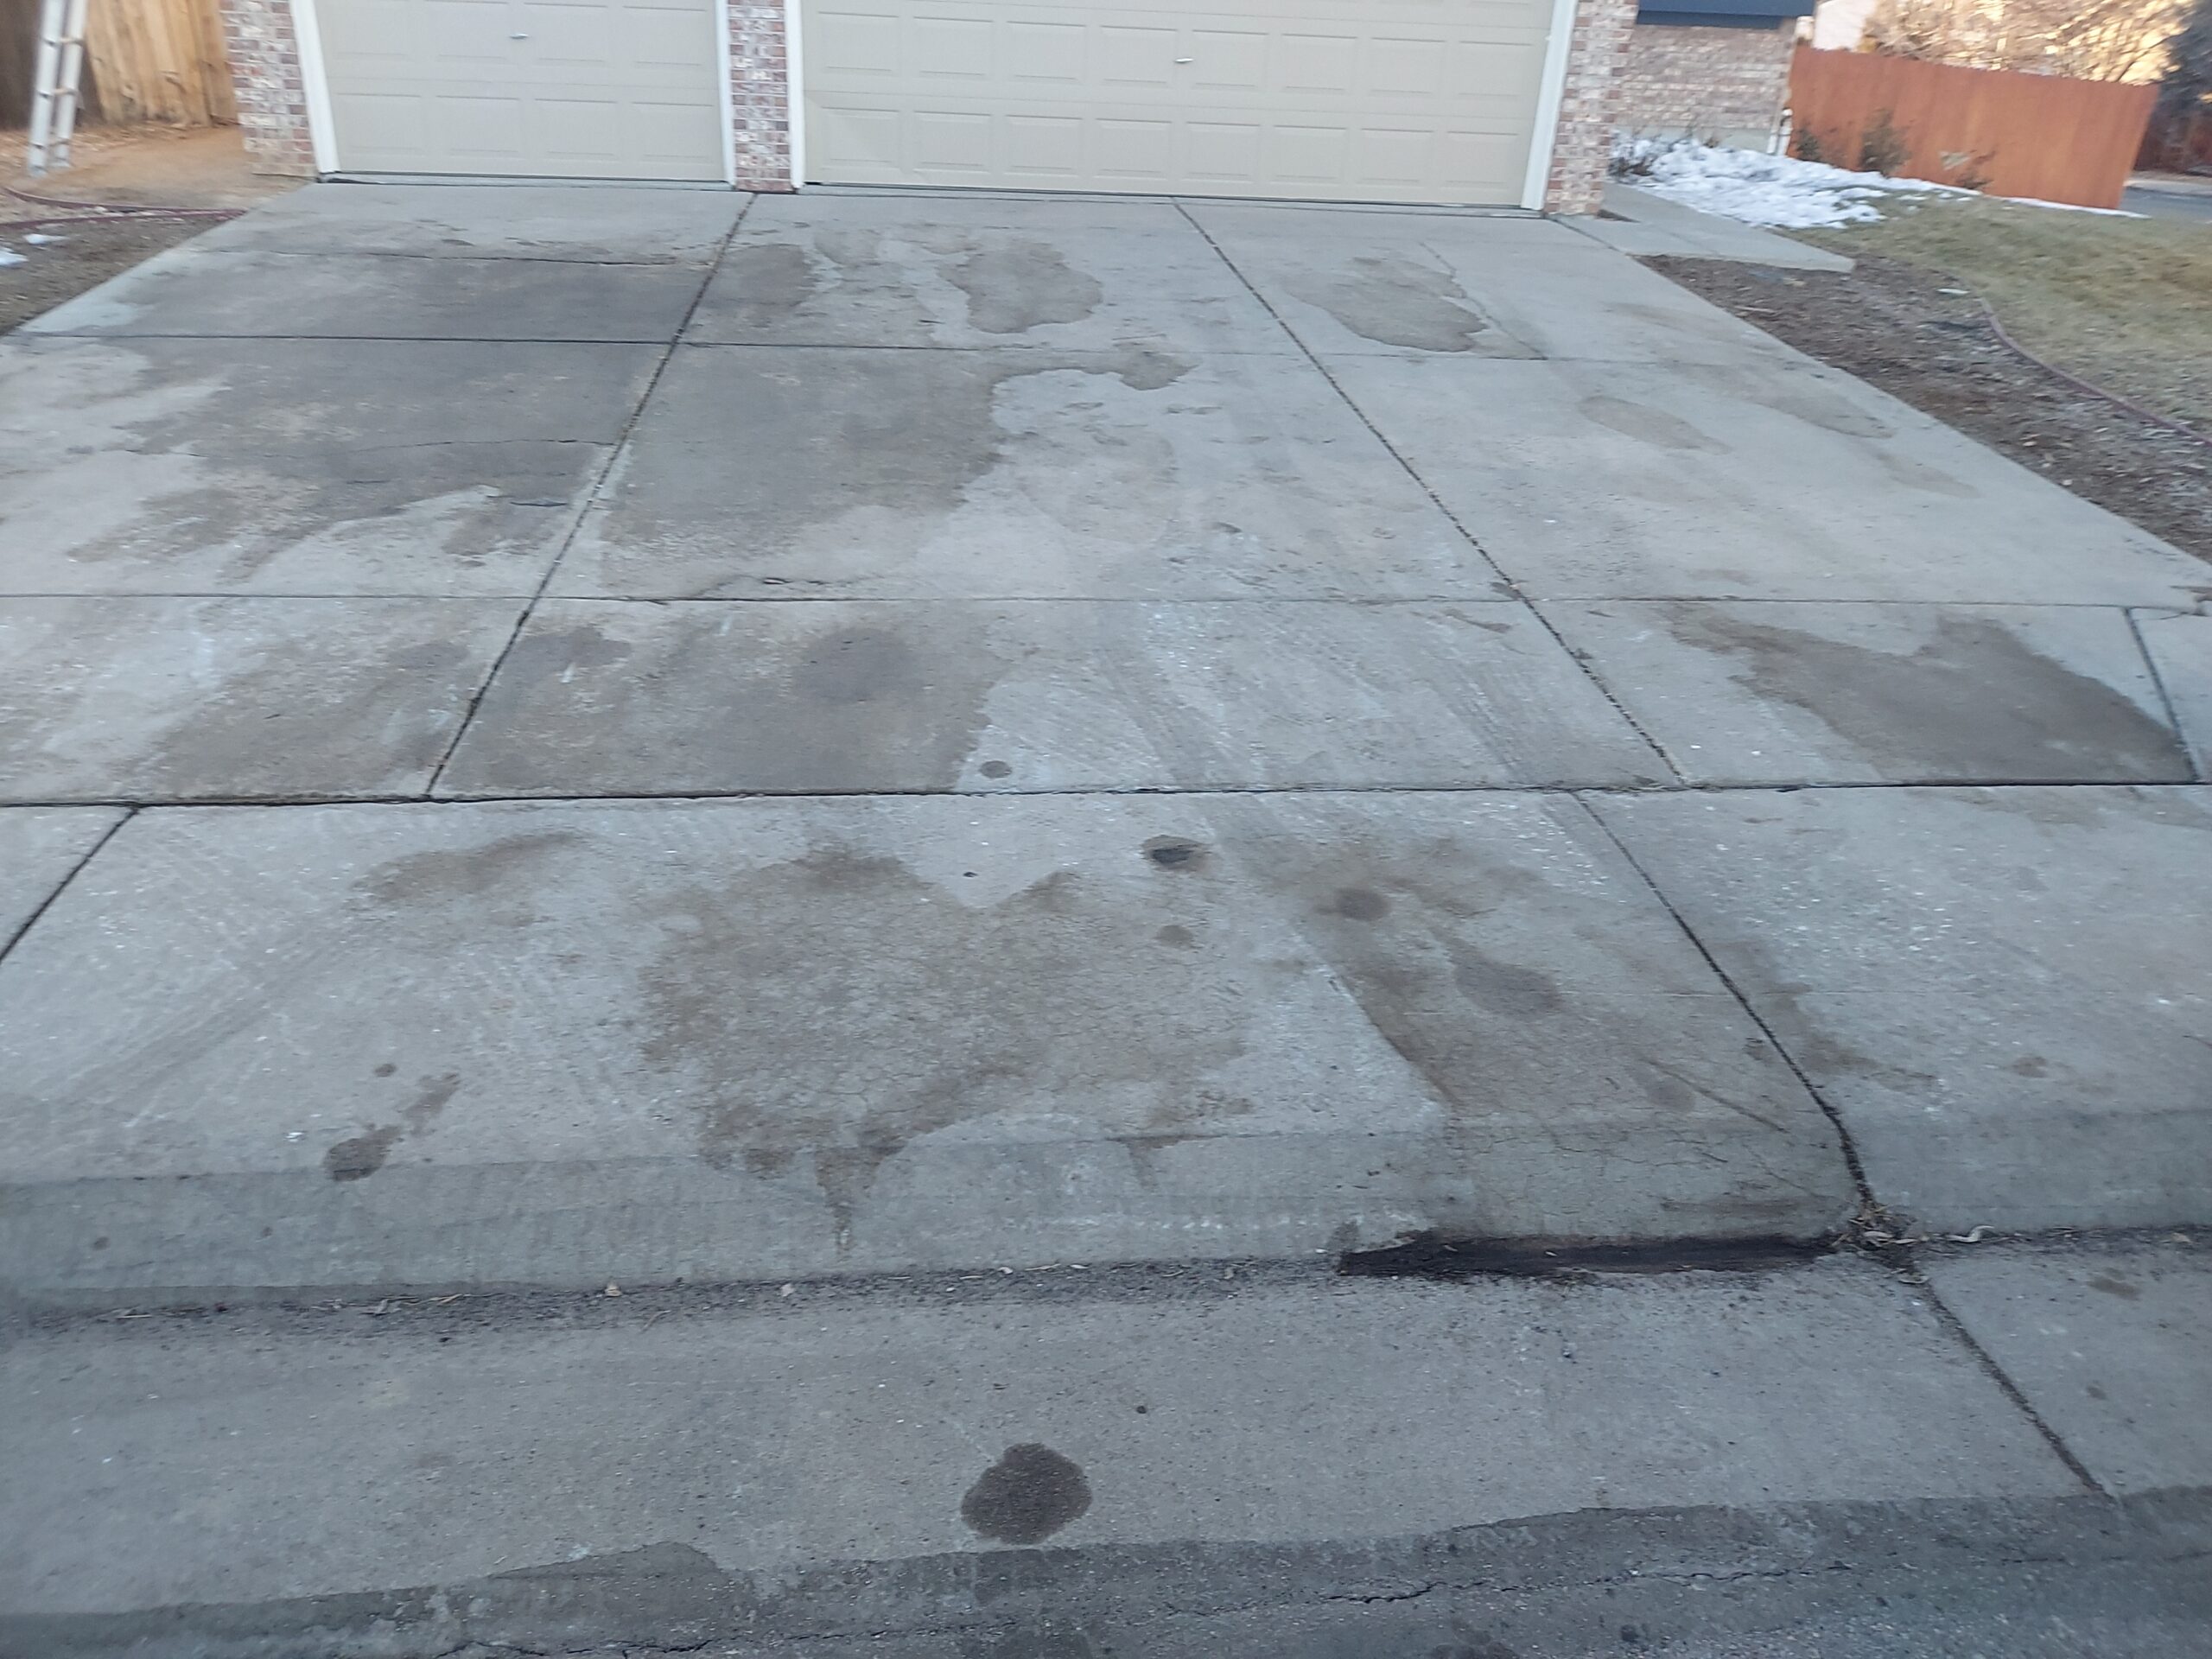 Driveway with oil stains.